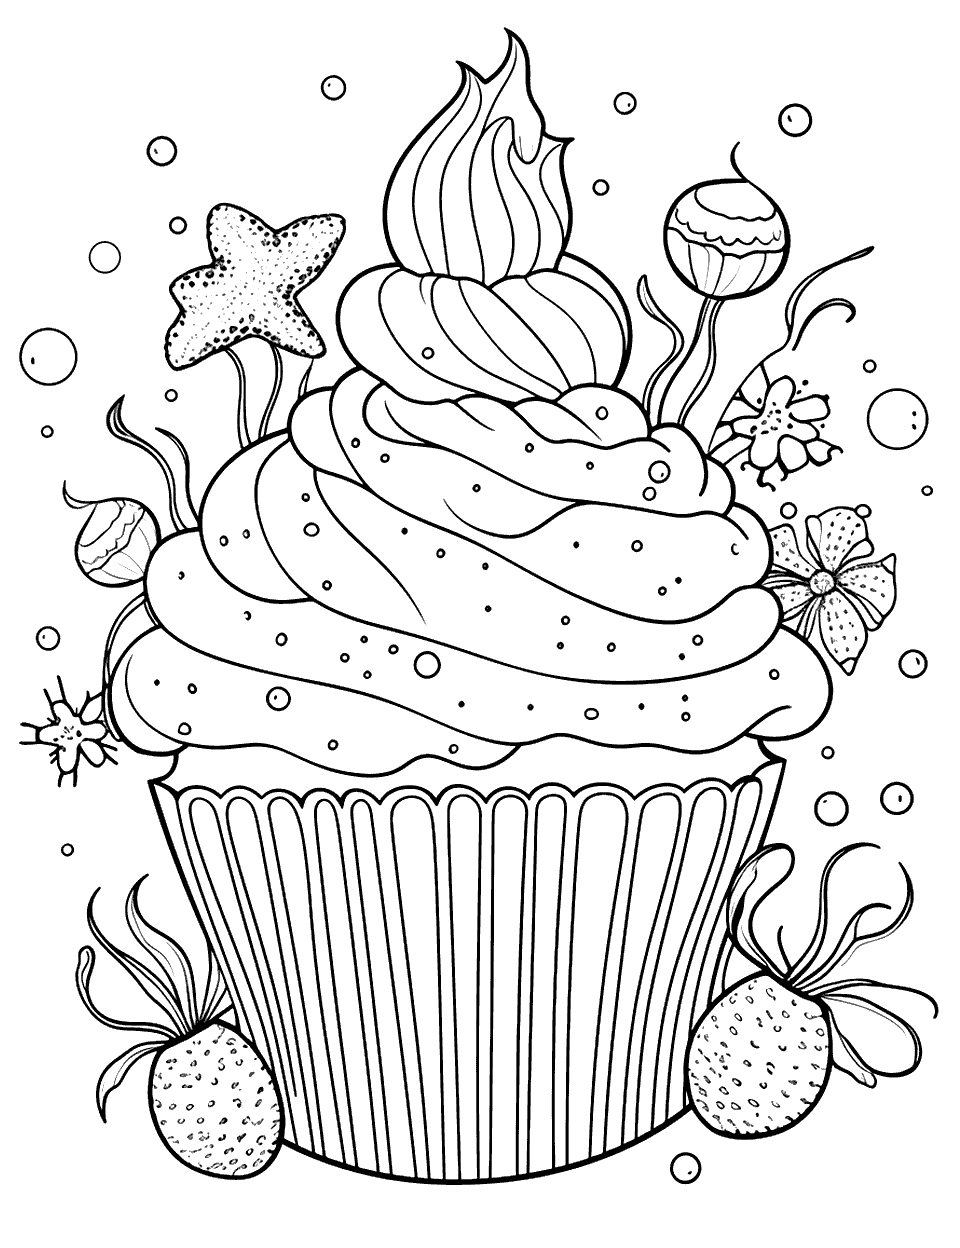 Underwater Cupcake Scene Coloring Page - A cupcake decorated with an ocean theme.